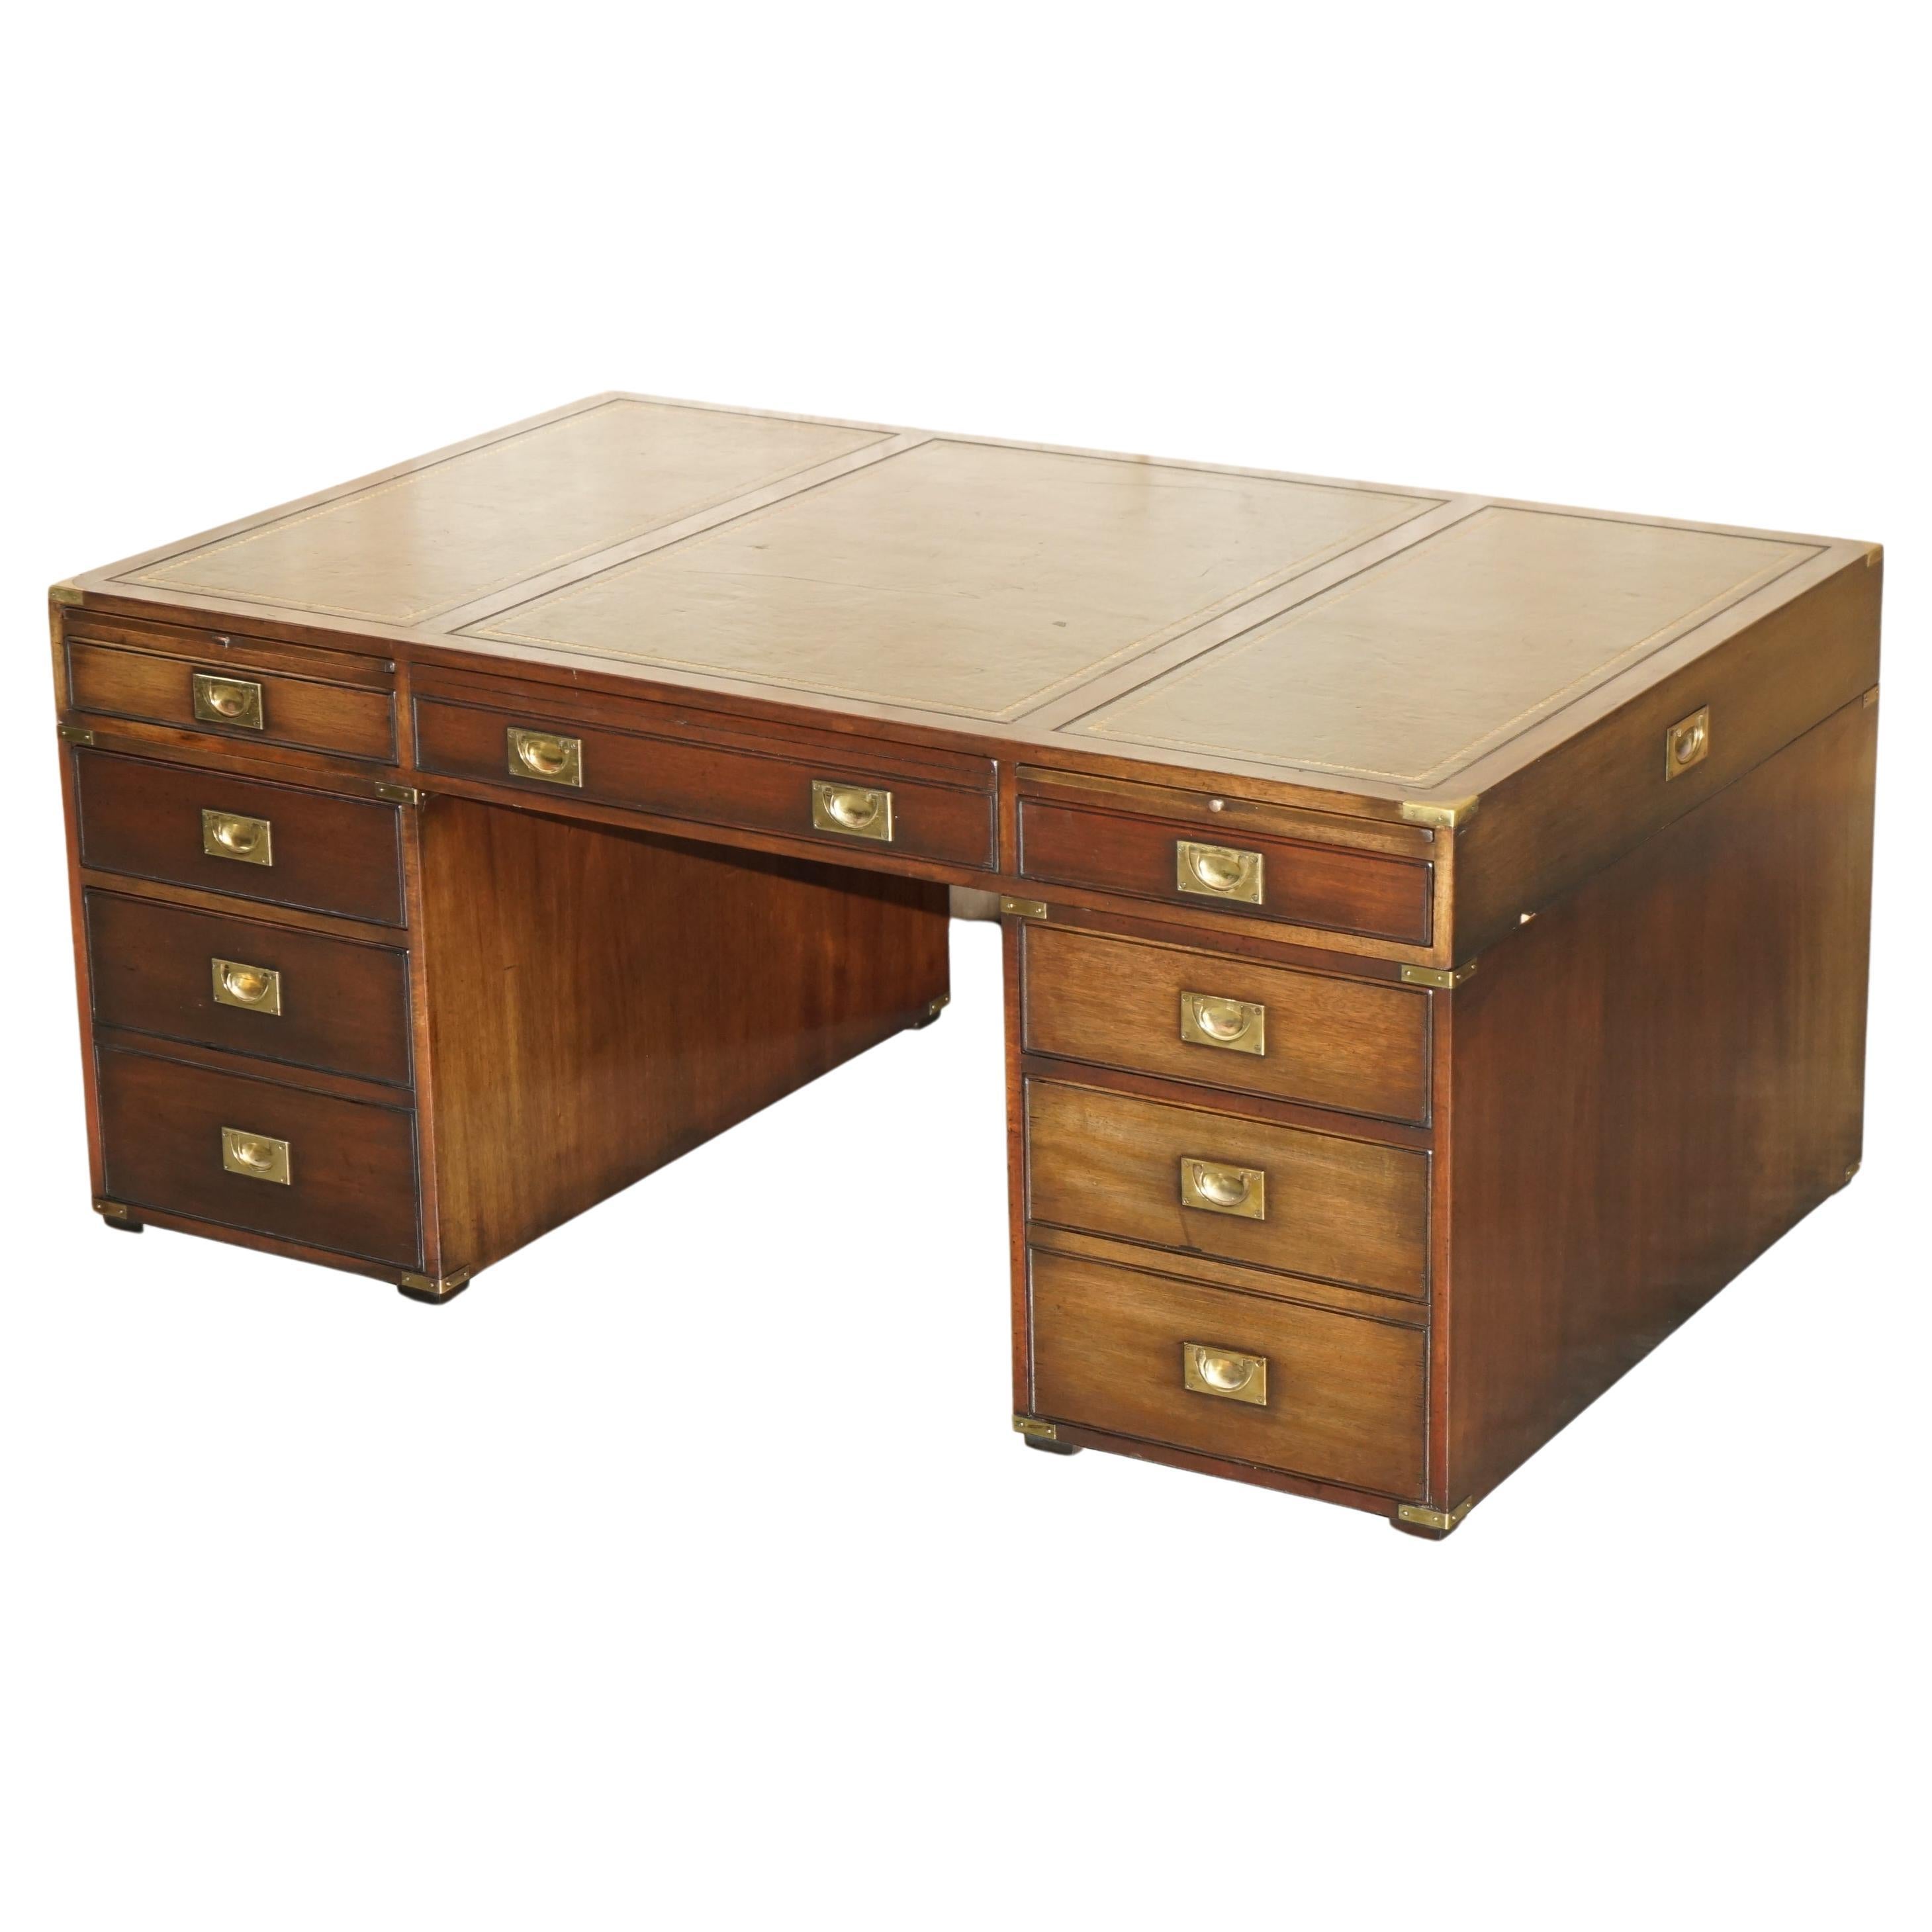 HARRODS KENNEDY DOUBLE SIDED TWO PERSON MILITARY CAMPAIGN TWiN PEDESTAL DESK For Sale